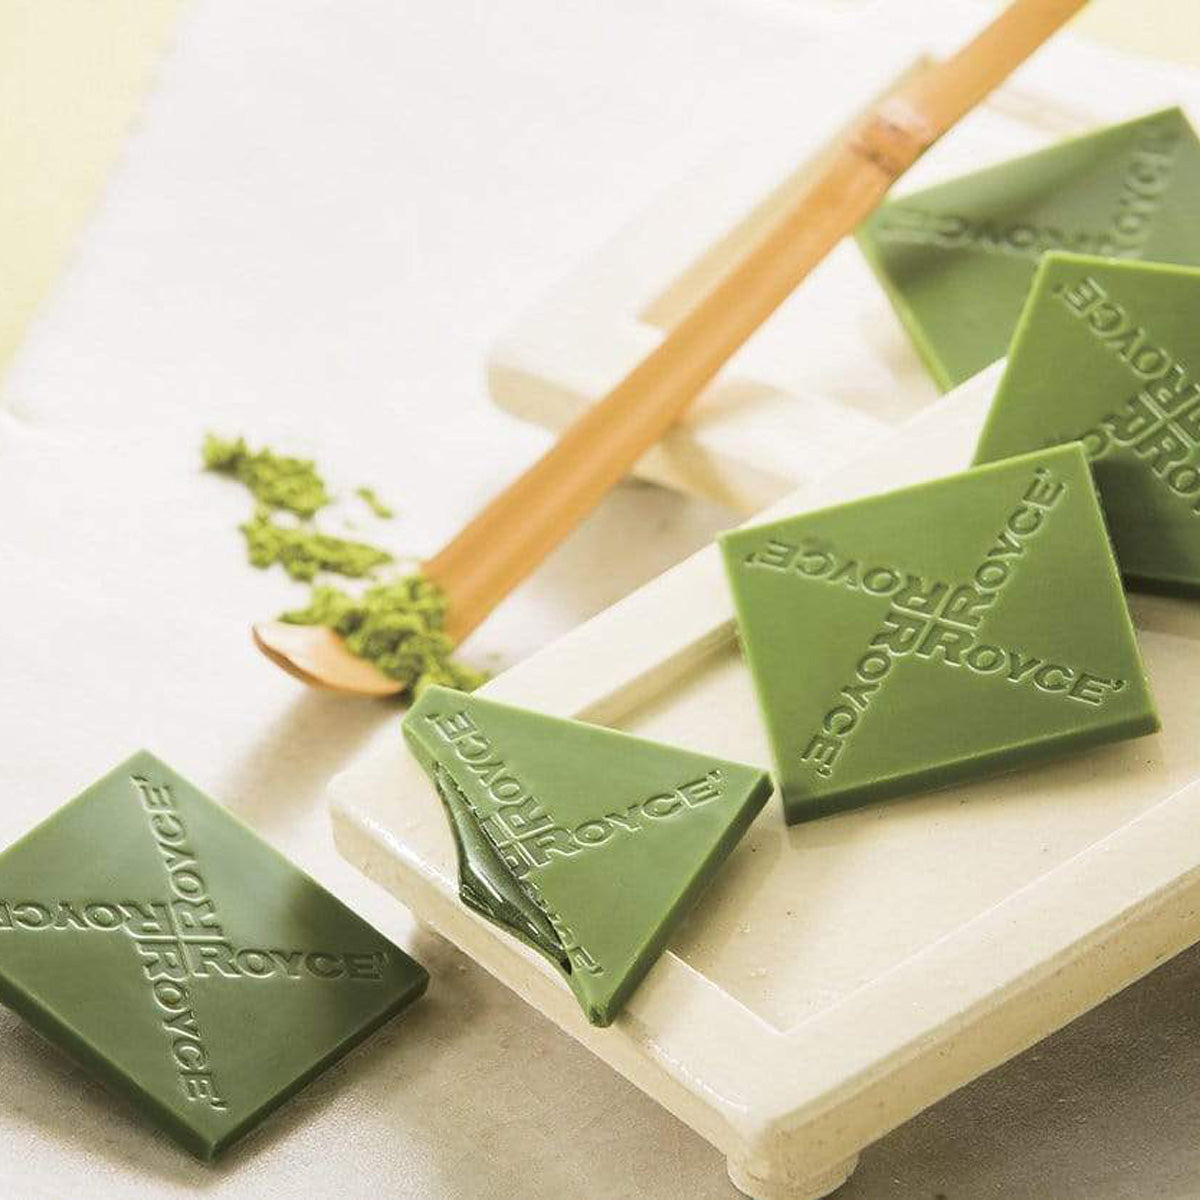 ROYCE' Chocolate - Prafeuille Chocolat "Matcha" - Image shows green chocolate squares filled with green sauce and engraved with the words "ROYCE'", as placed on white trays. Accents include a yellow wooden stick with green tea powder. Background is in white color.